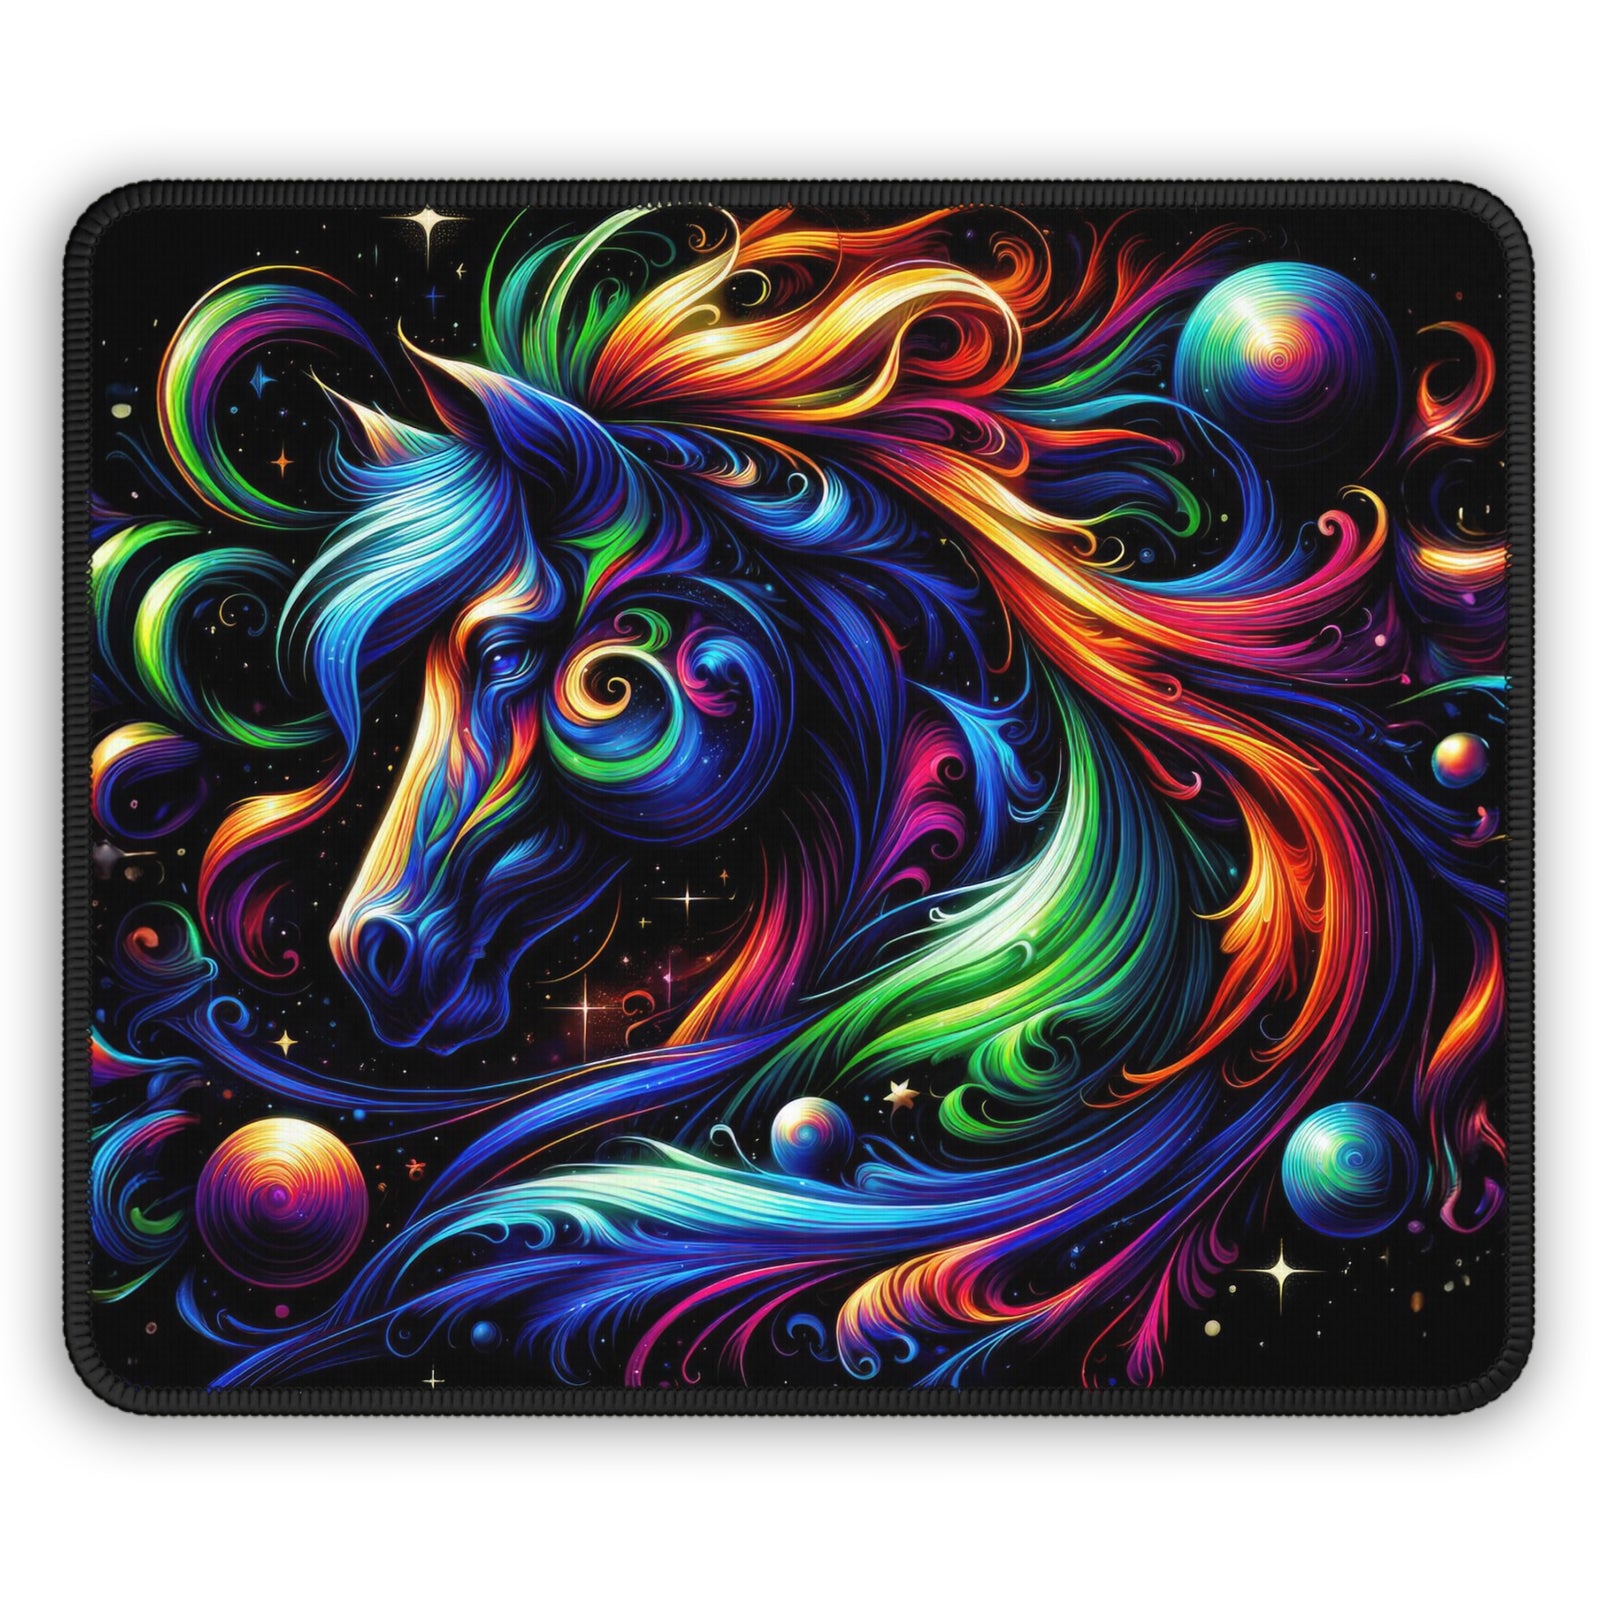 Cosmic Cascade Gaming Mouse Pad